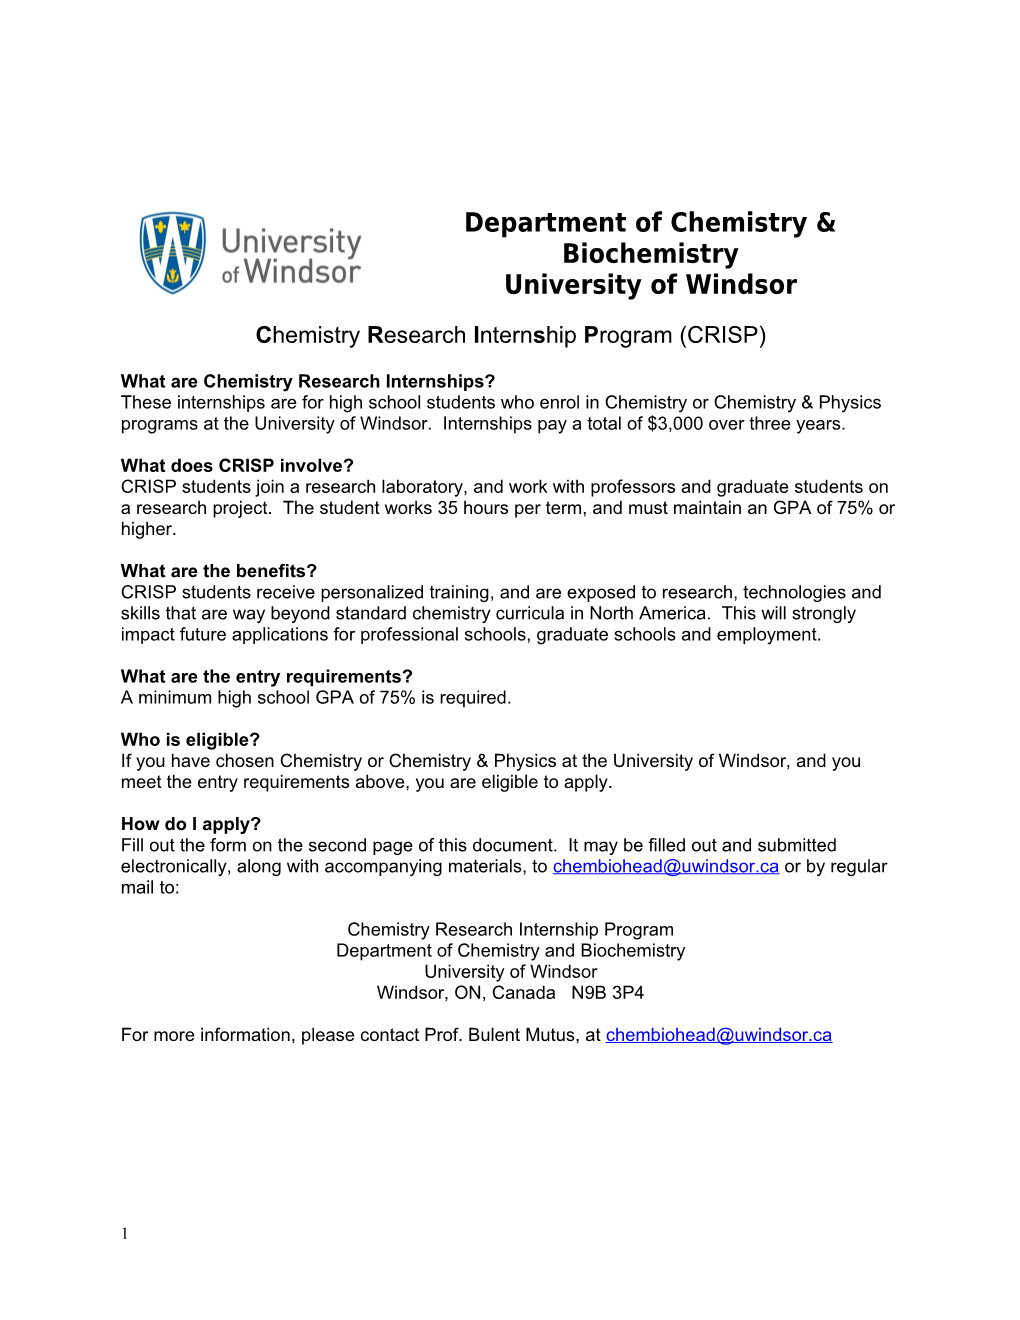 What Are Chemistry Research Internships?